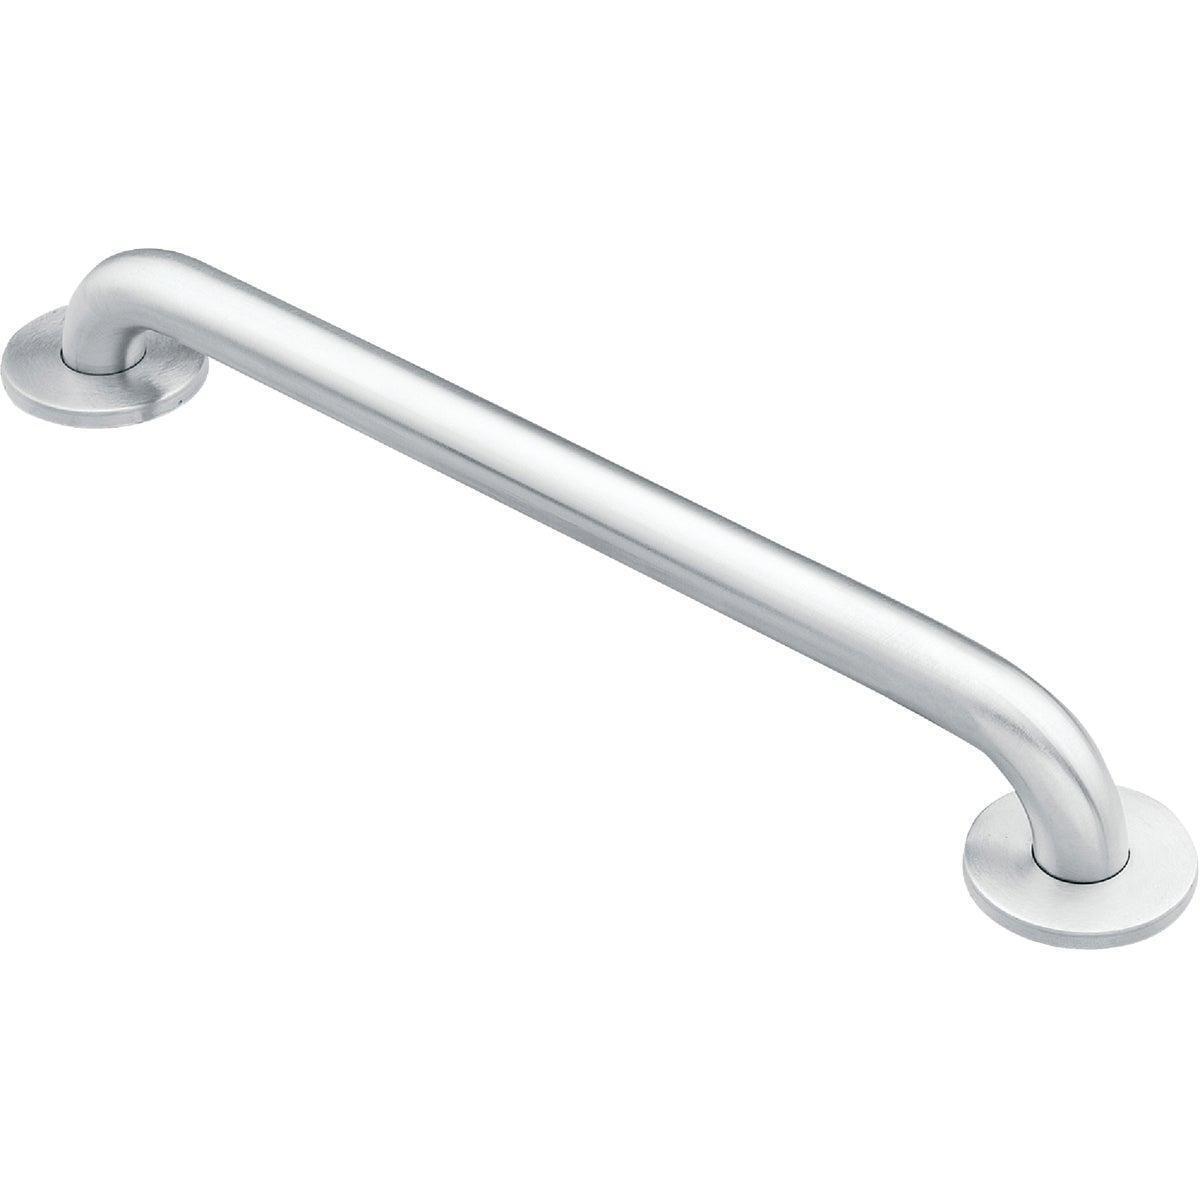 Moen Home Care 18 In. Concealed Screw Grab Bar, Stainless Steel L8718